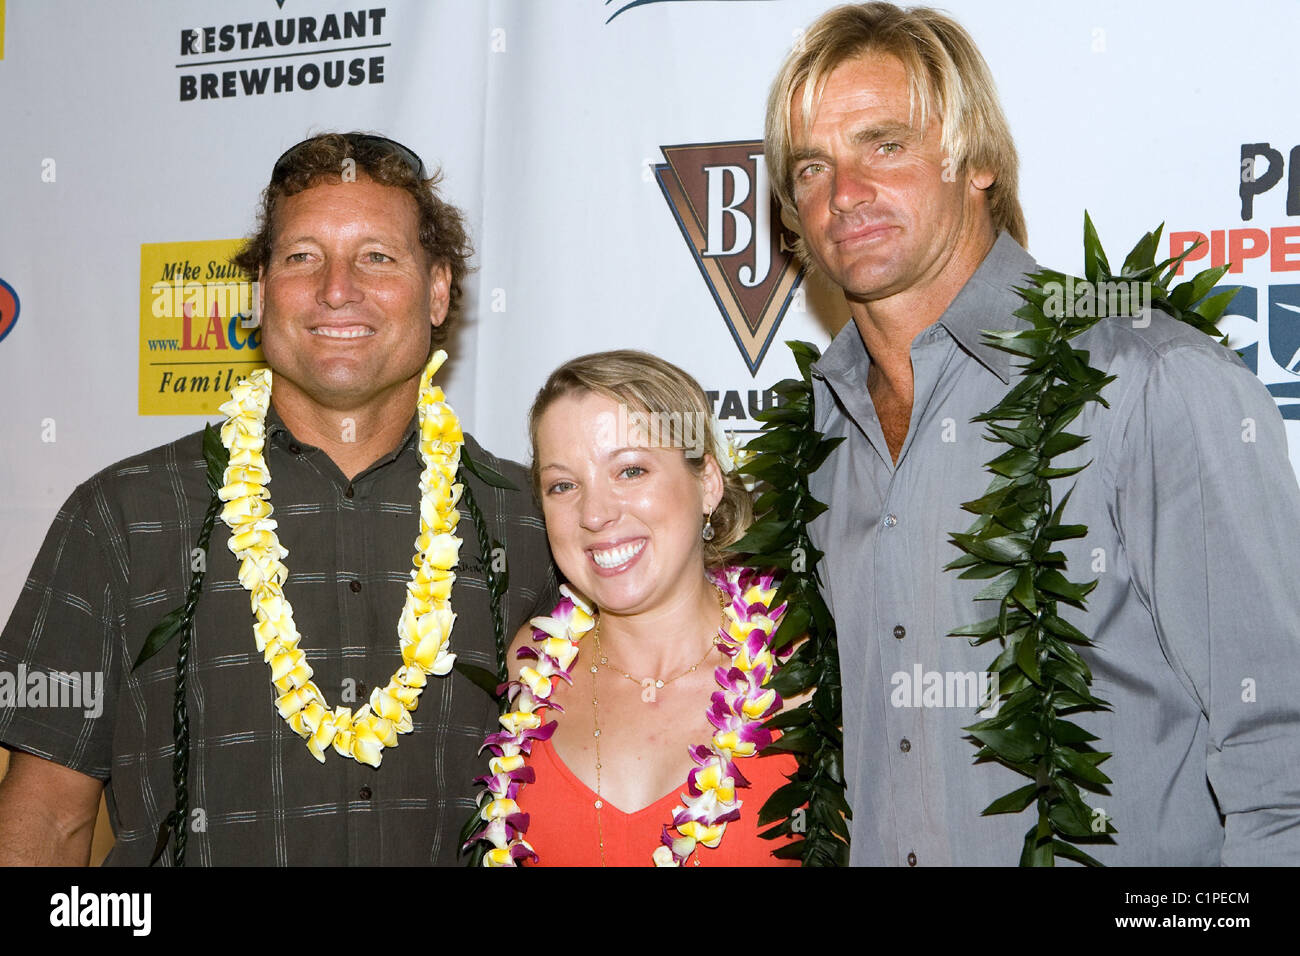 Dave Kalama and Laird Hamilton with guest The Pacsun Pipeline Campaign Fundraiser for Cystic Fibrosis held in the Hyatt Regency Stock Photo